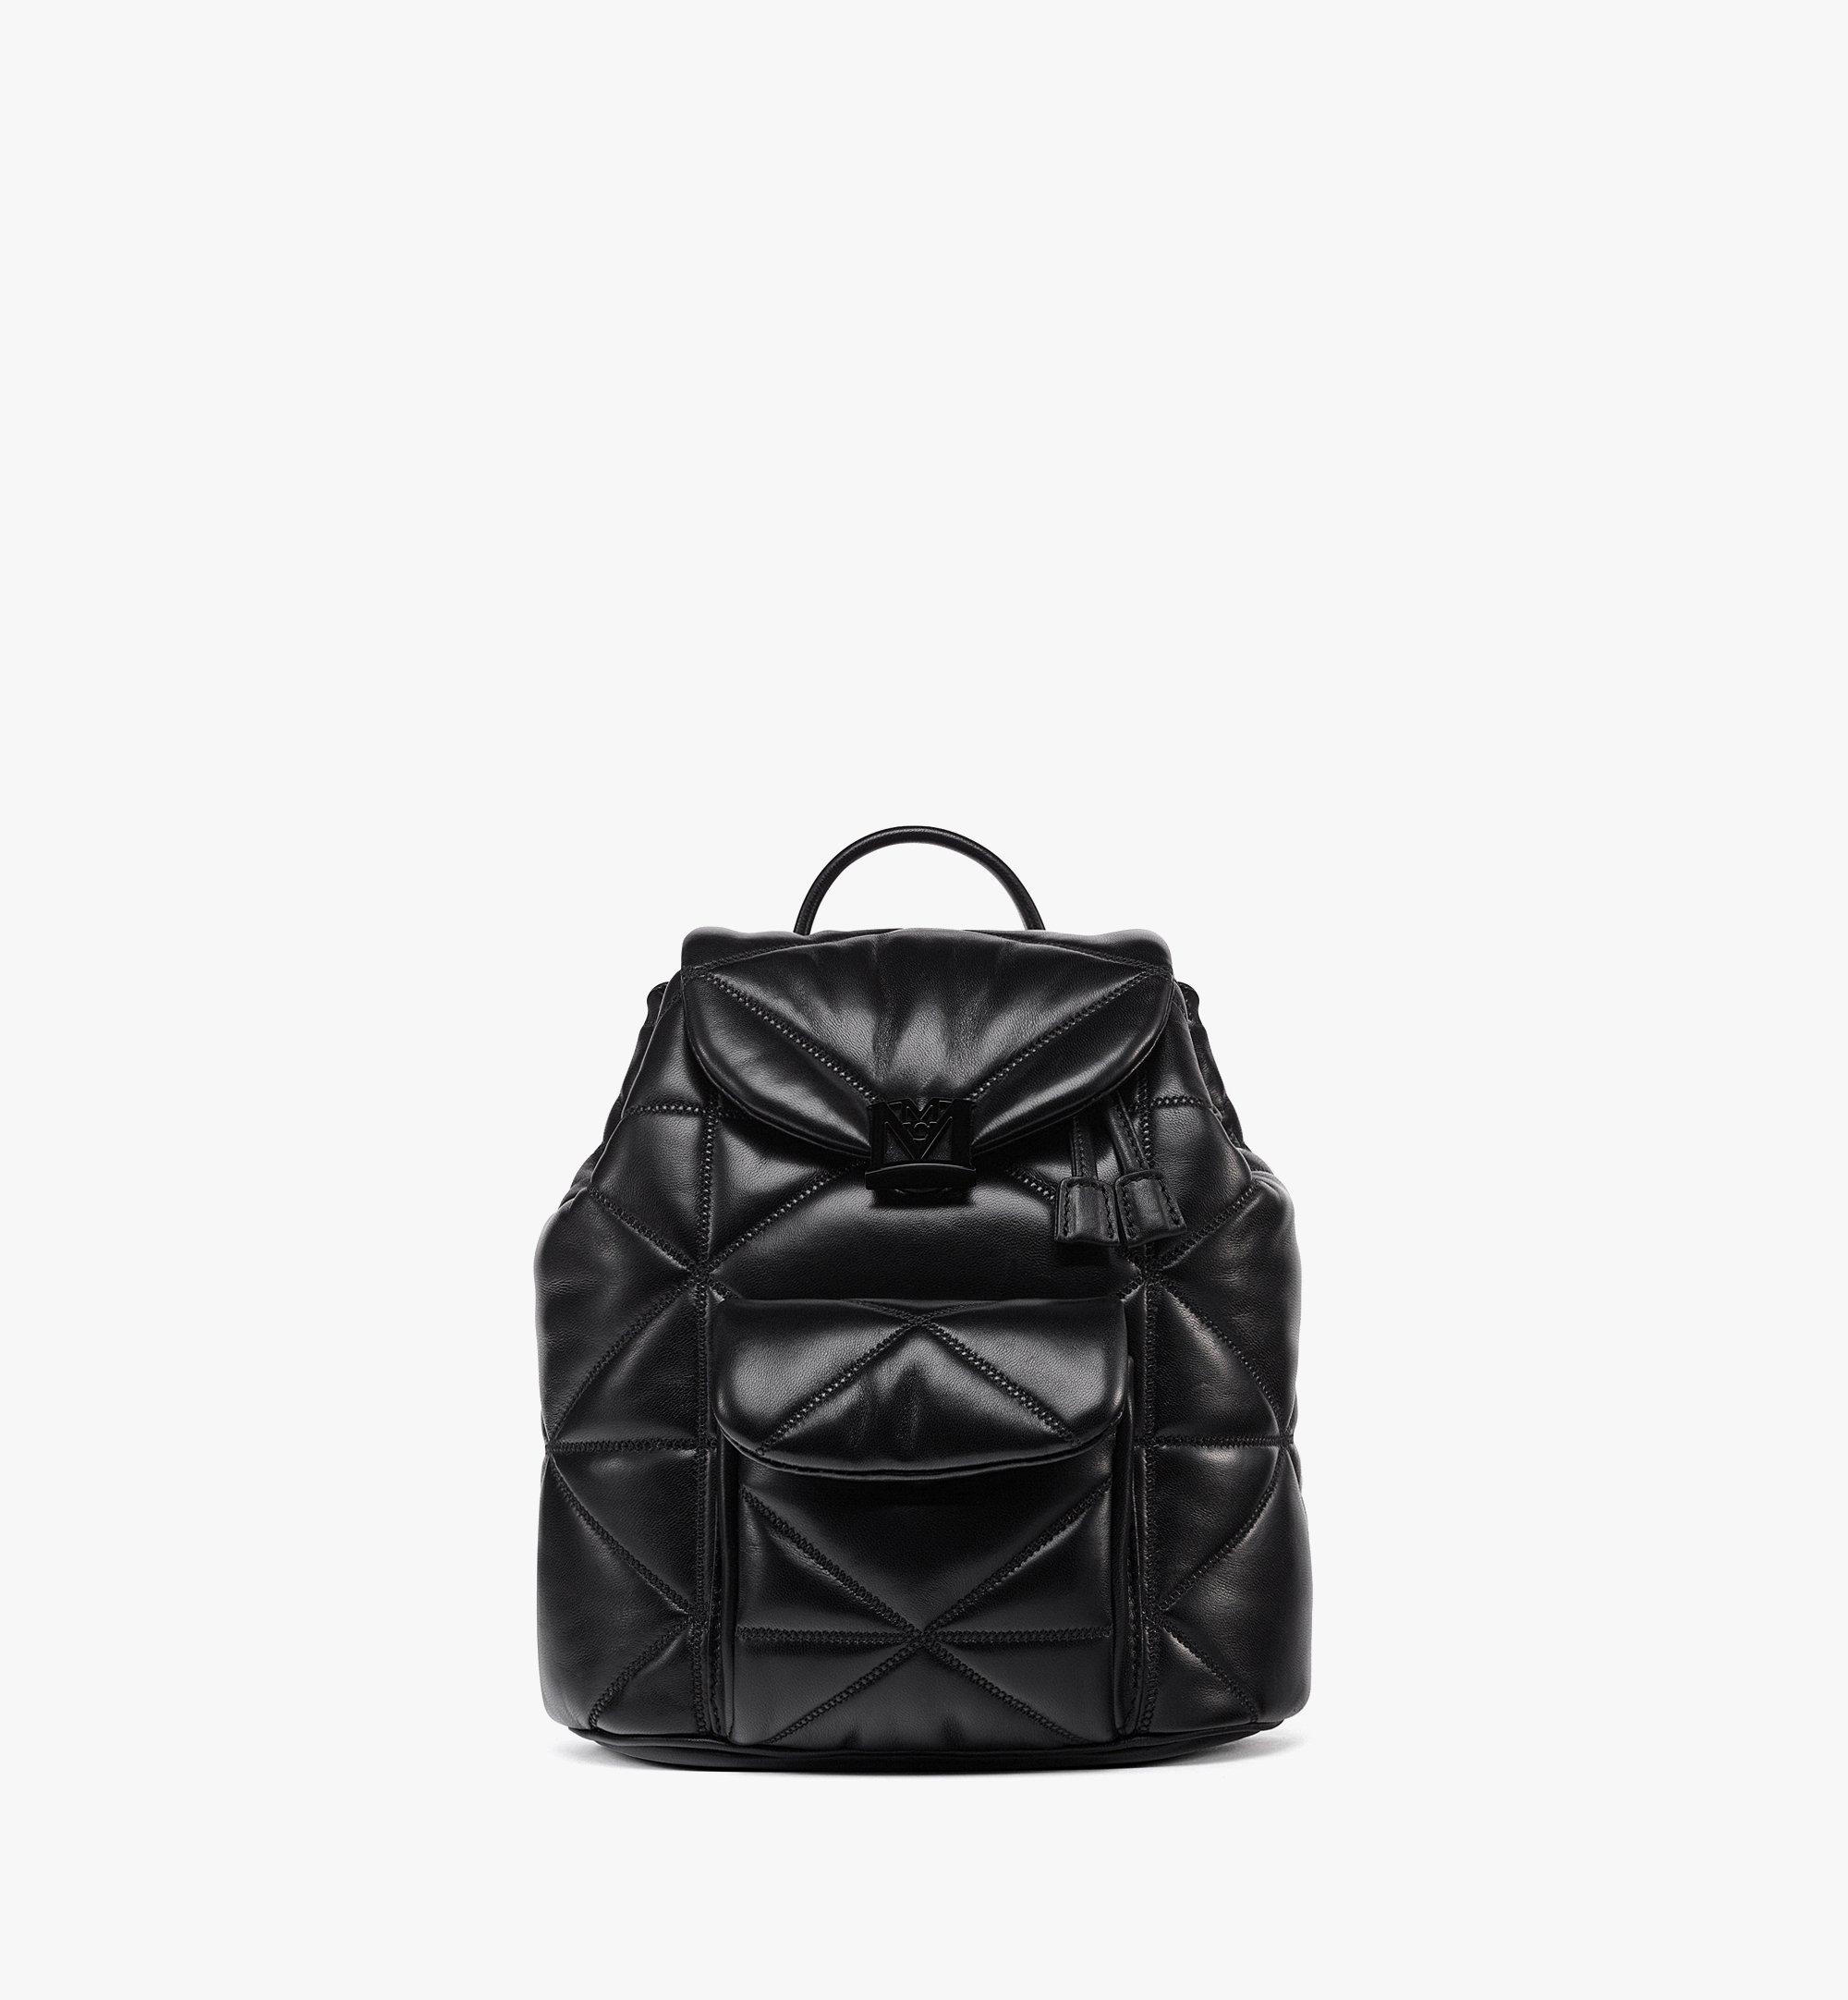 MCM Travia Backpack in Cloud Quilted Lamb Leather Black MWKDALM01BK001 Alternate View 1